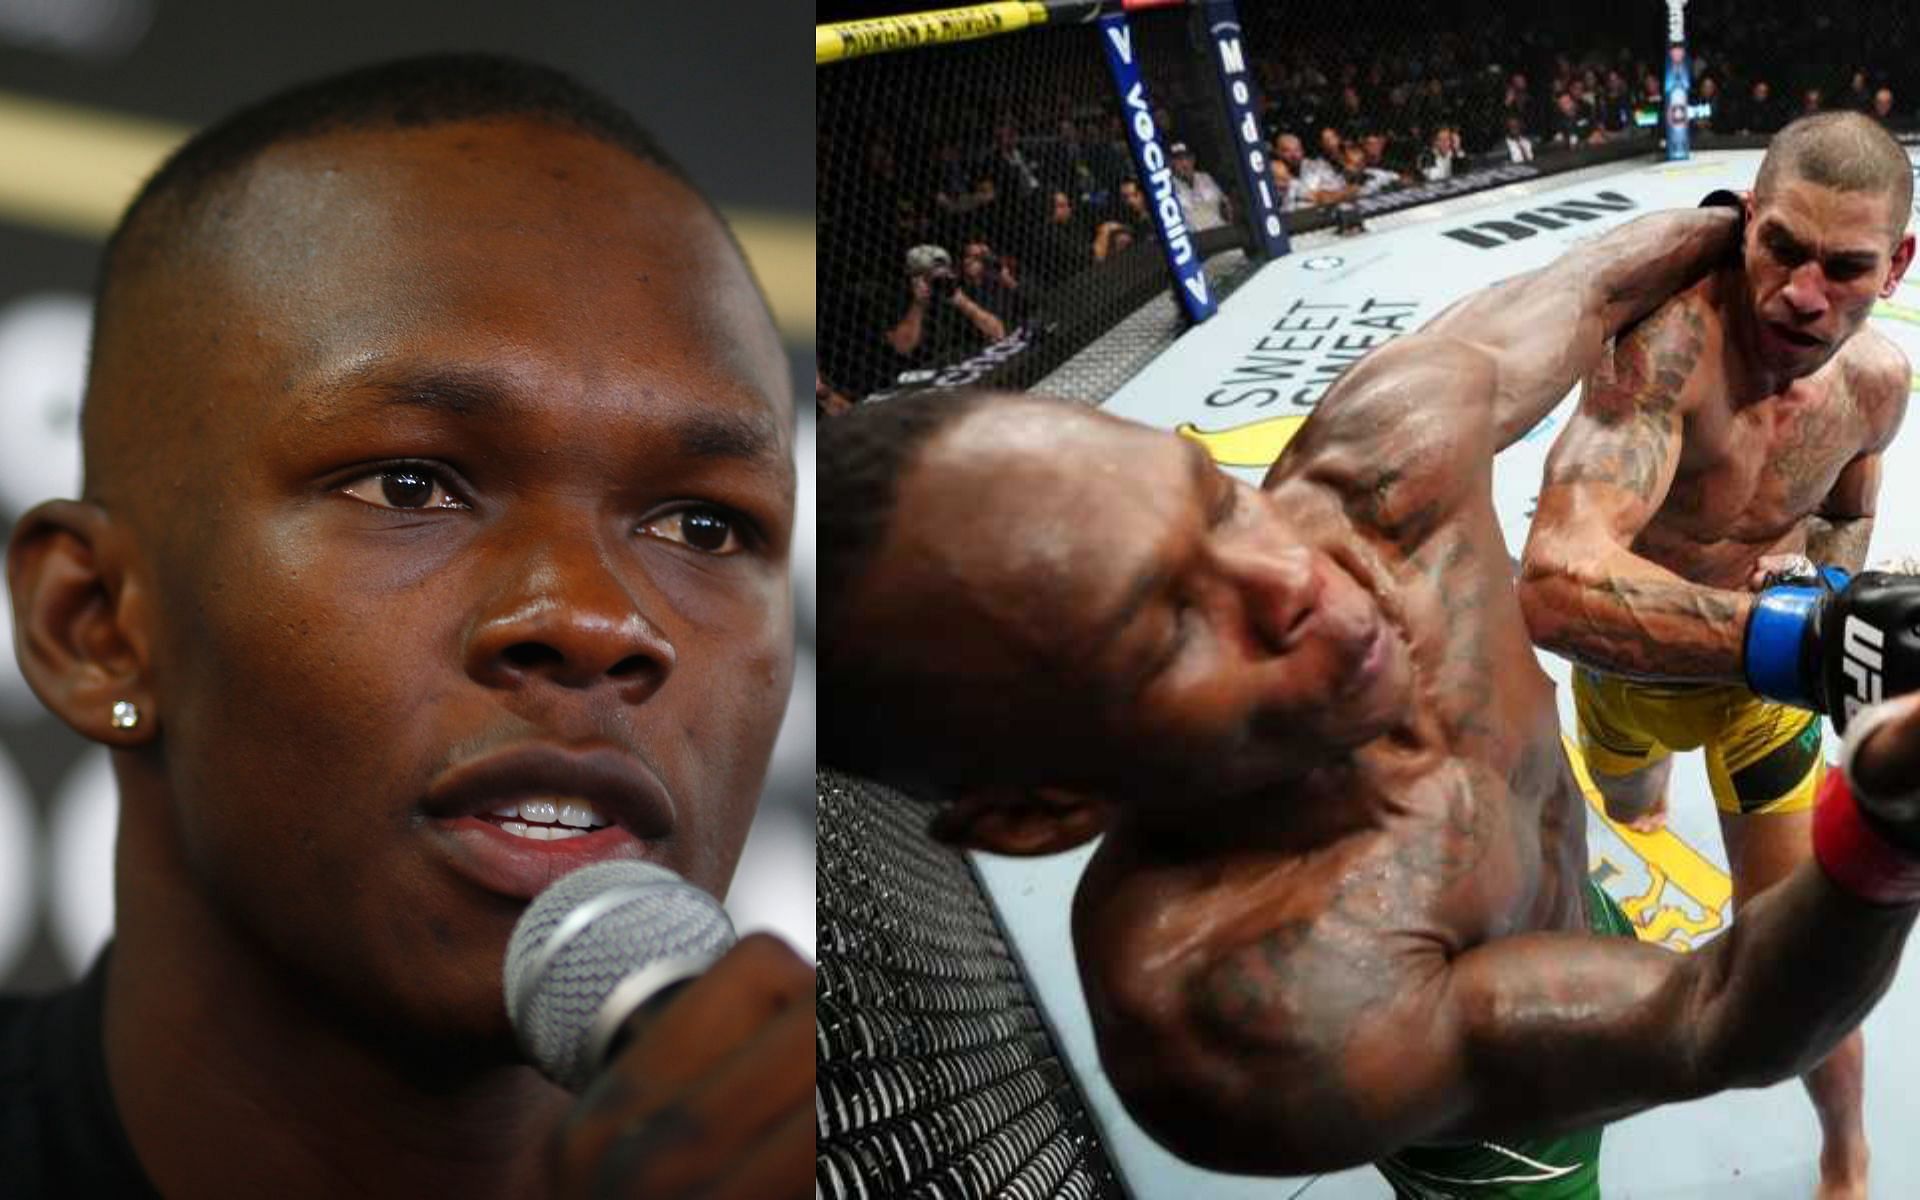 Israel Adesanya (left) getting knocked out by Alex Pereira (right). [via Getty Images and UFC]